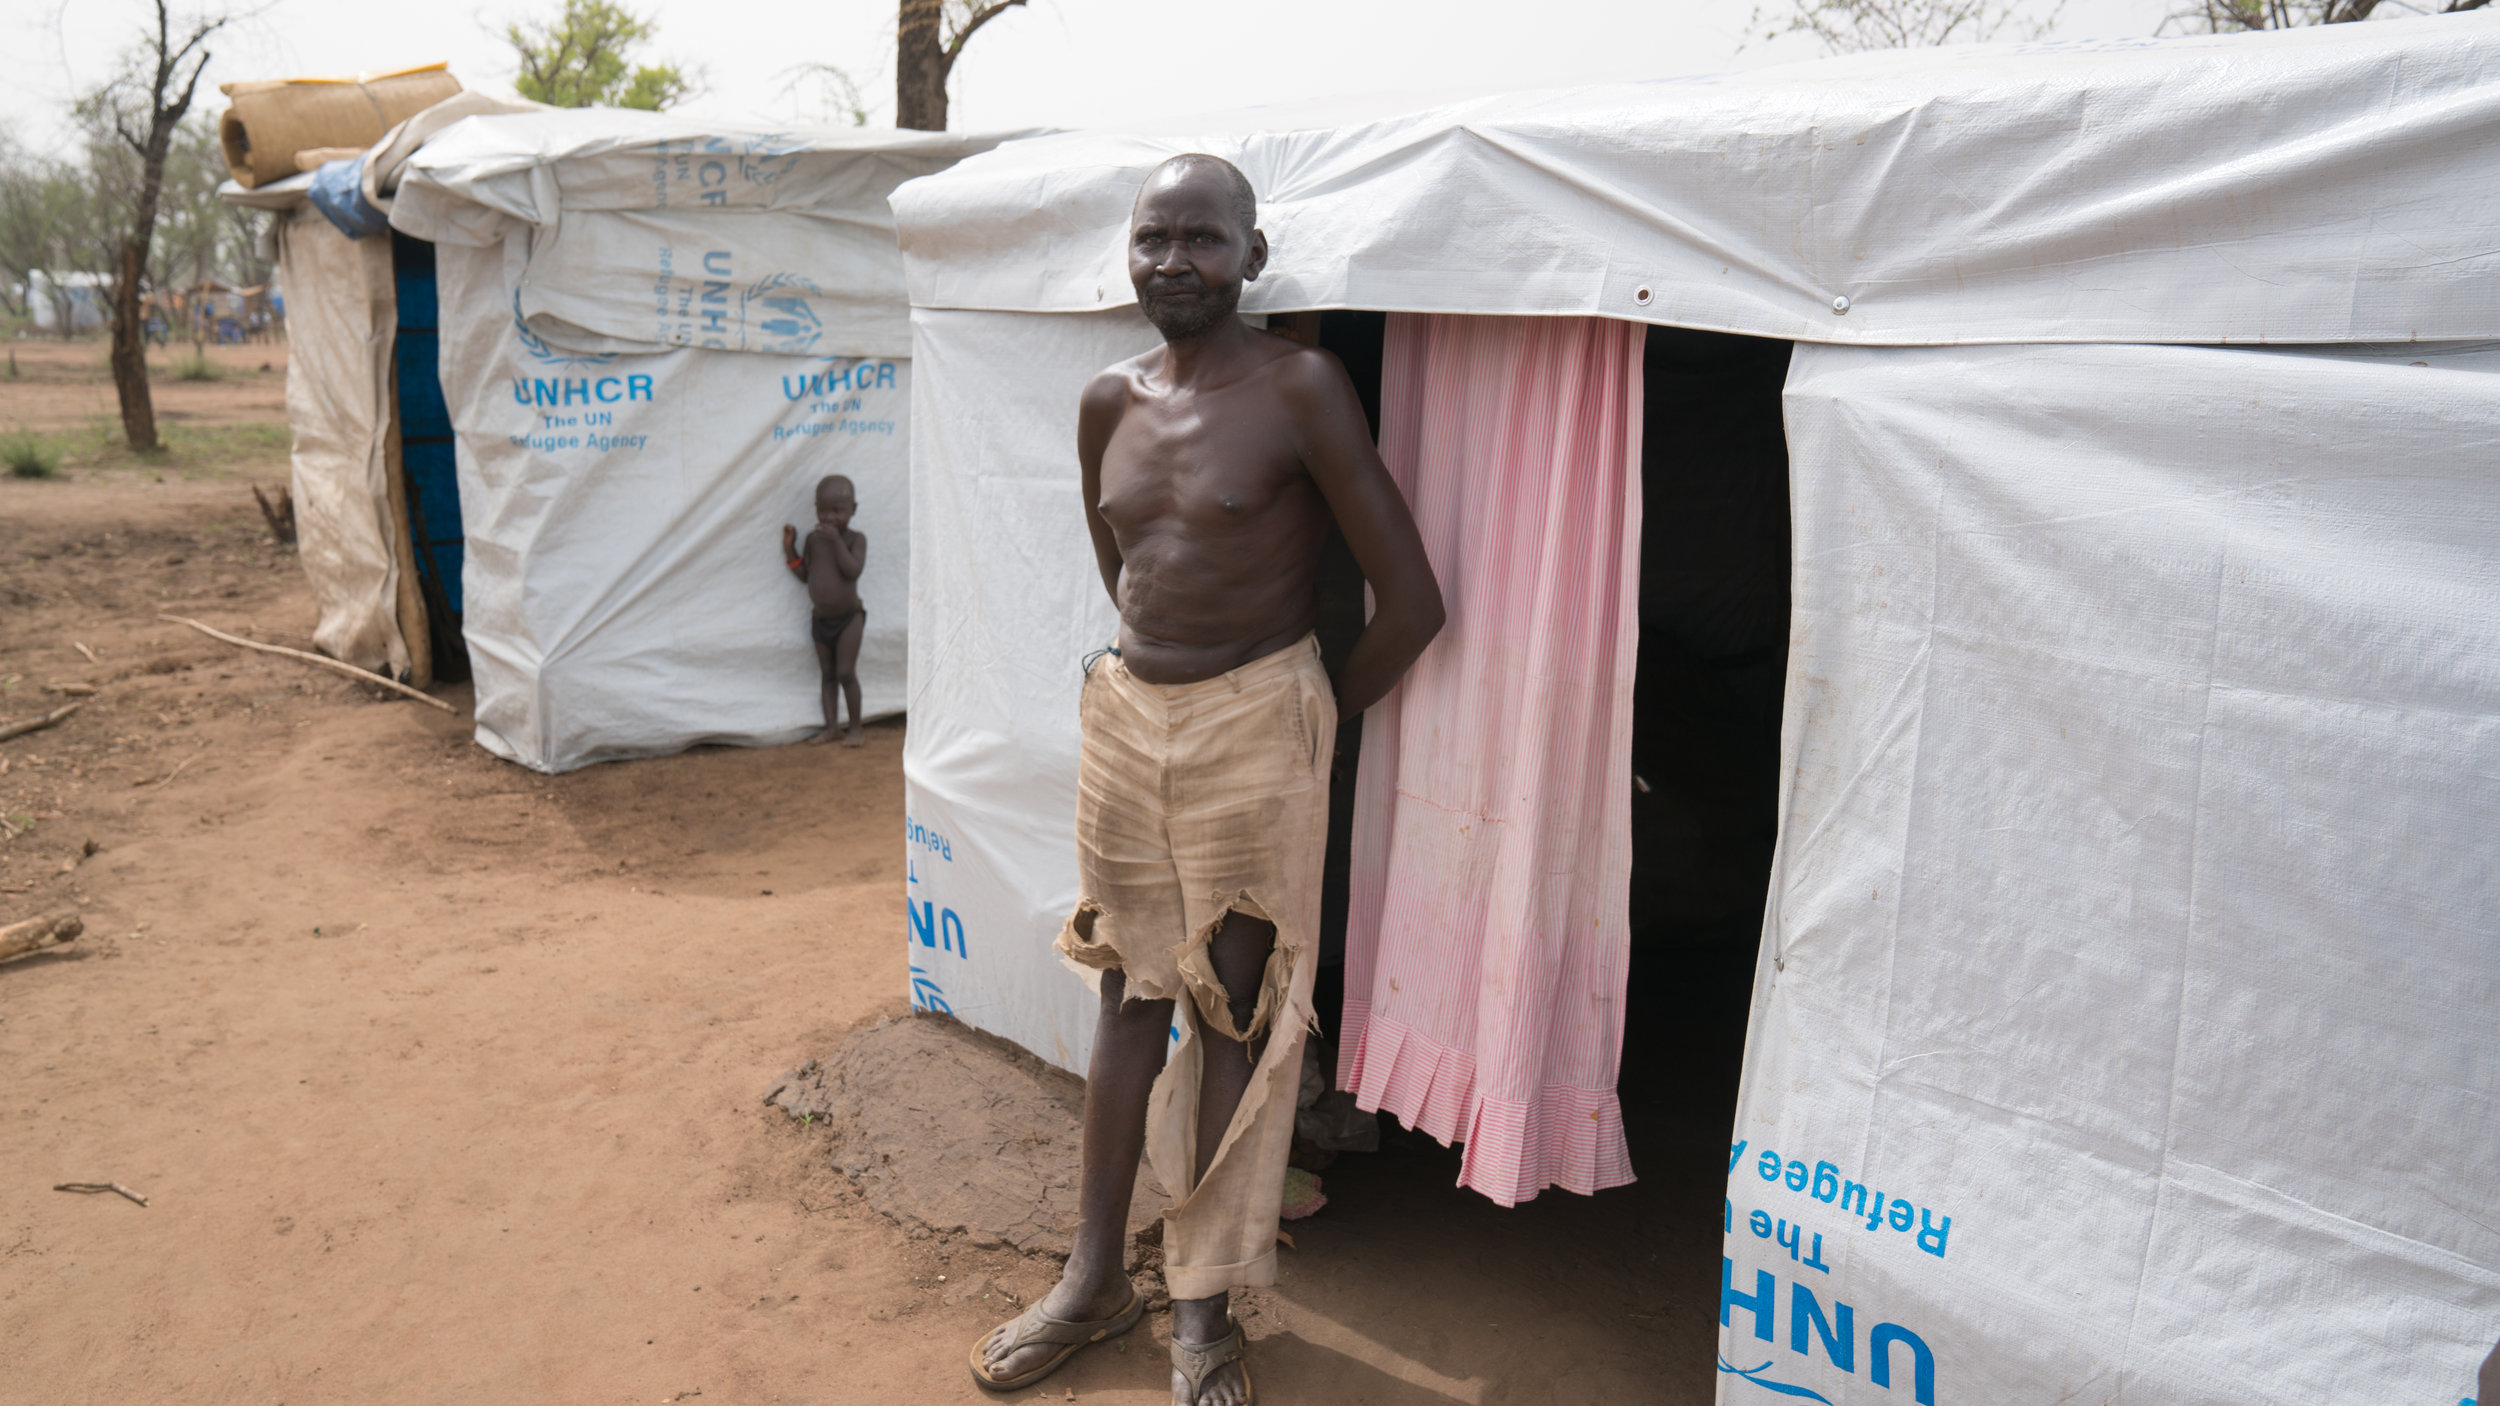   The Healing Kadi Foundation   providing sustainable health care to the people of South Sudan   Refugees Mobile Clinic  